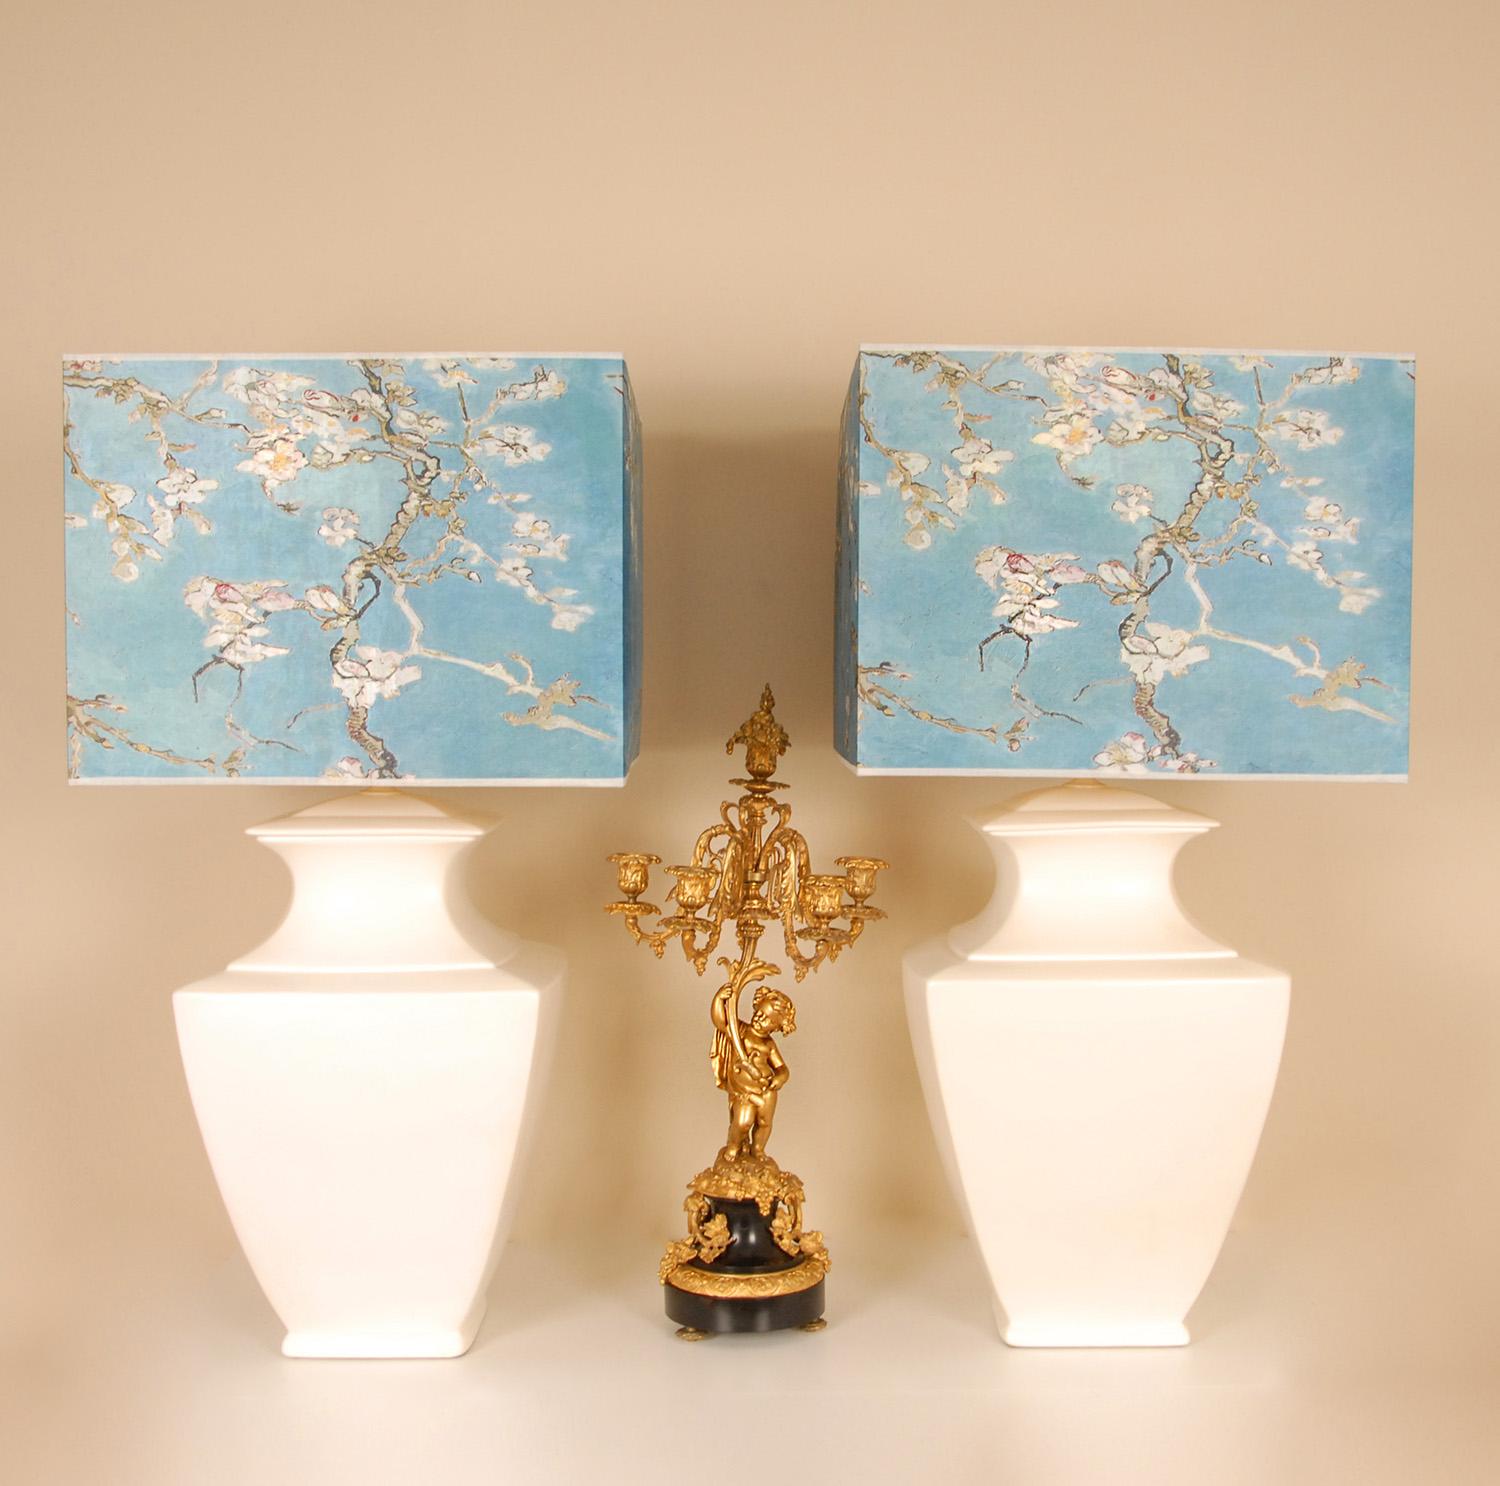 Vintage Tall Spanish Chinoiserie square Table Lamps Ceramic Handmade.
The silk lampshades after Vincent van Gogh and the interior gold are in a new condition
Displaying size of the lamps is most difficult to do. It are fabulous tall lamps.
Material: